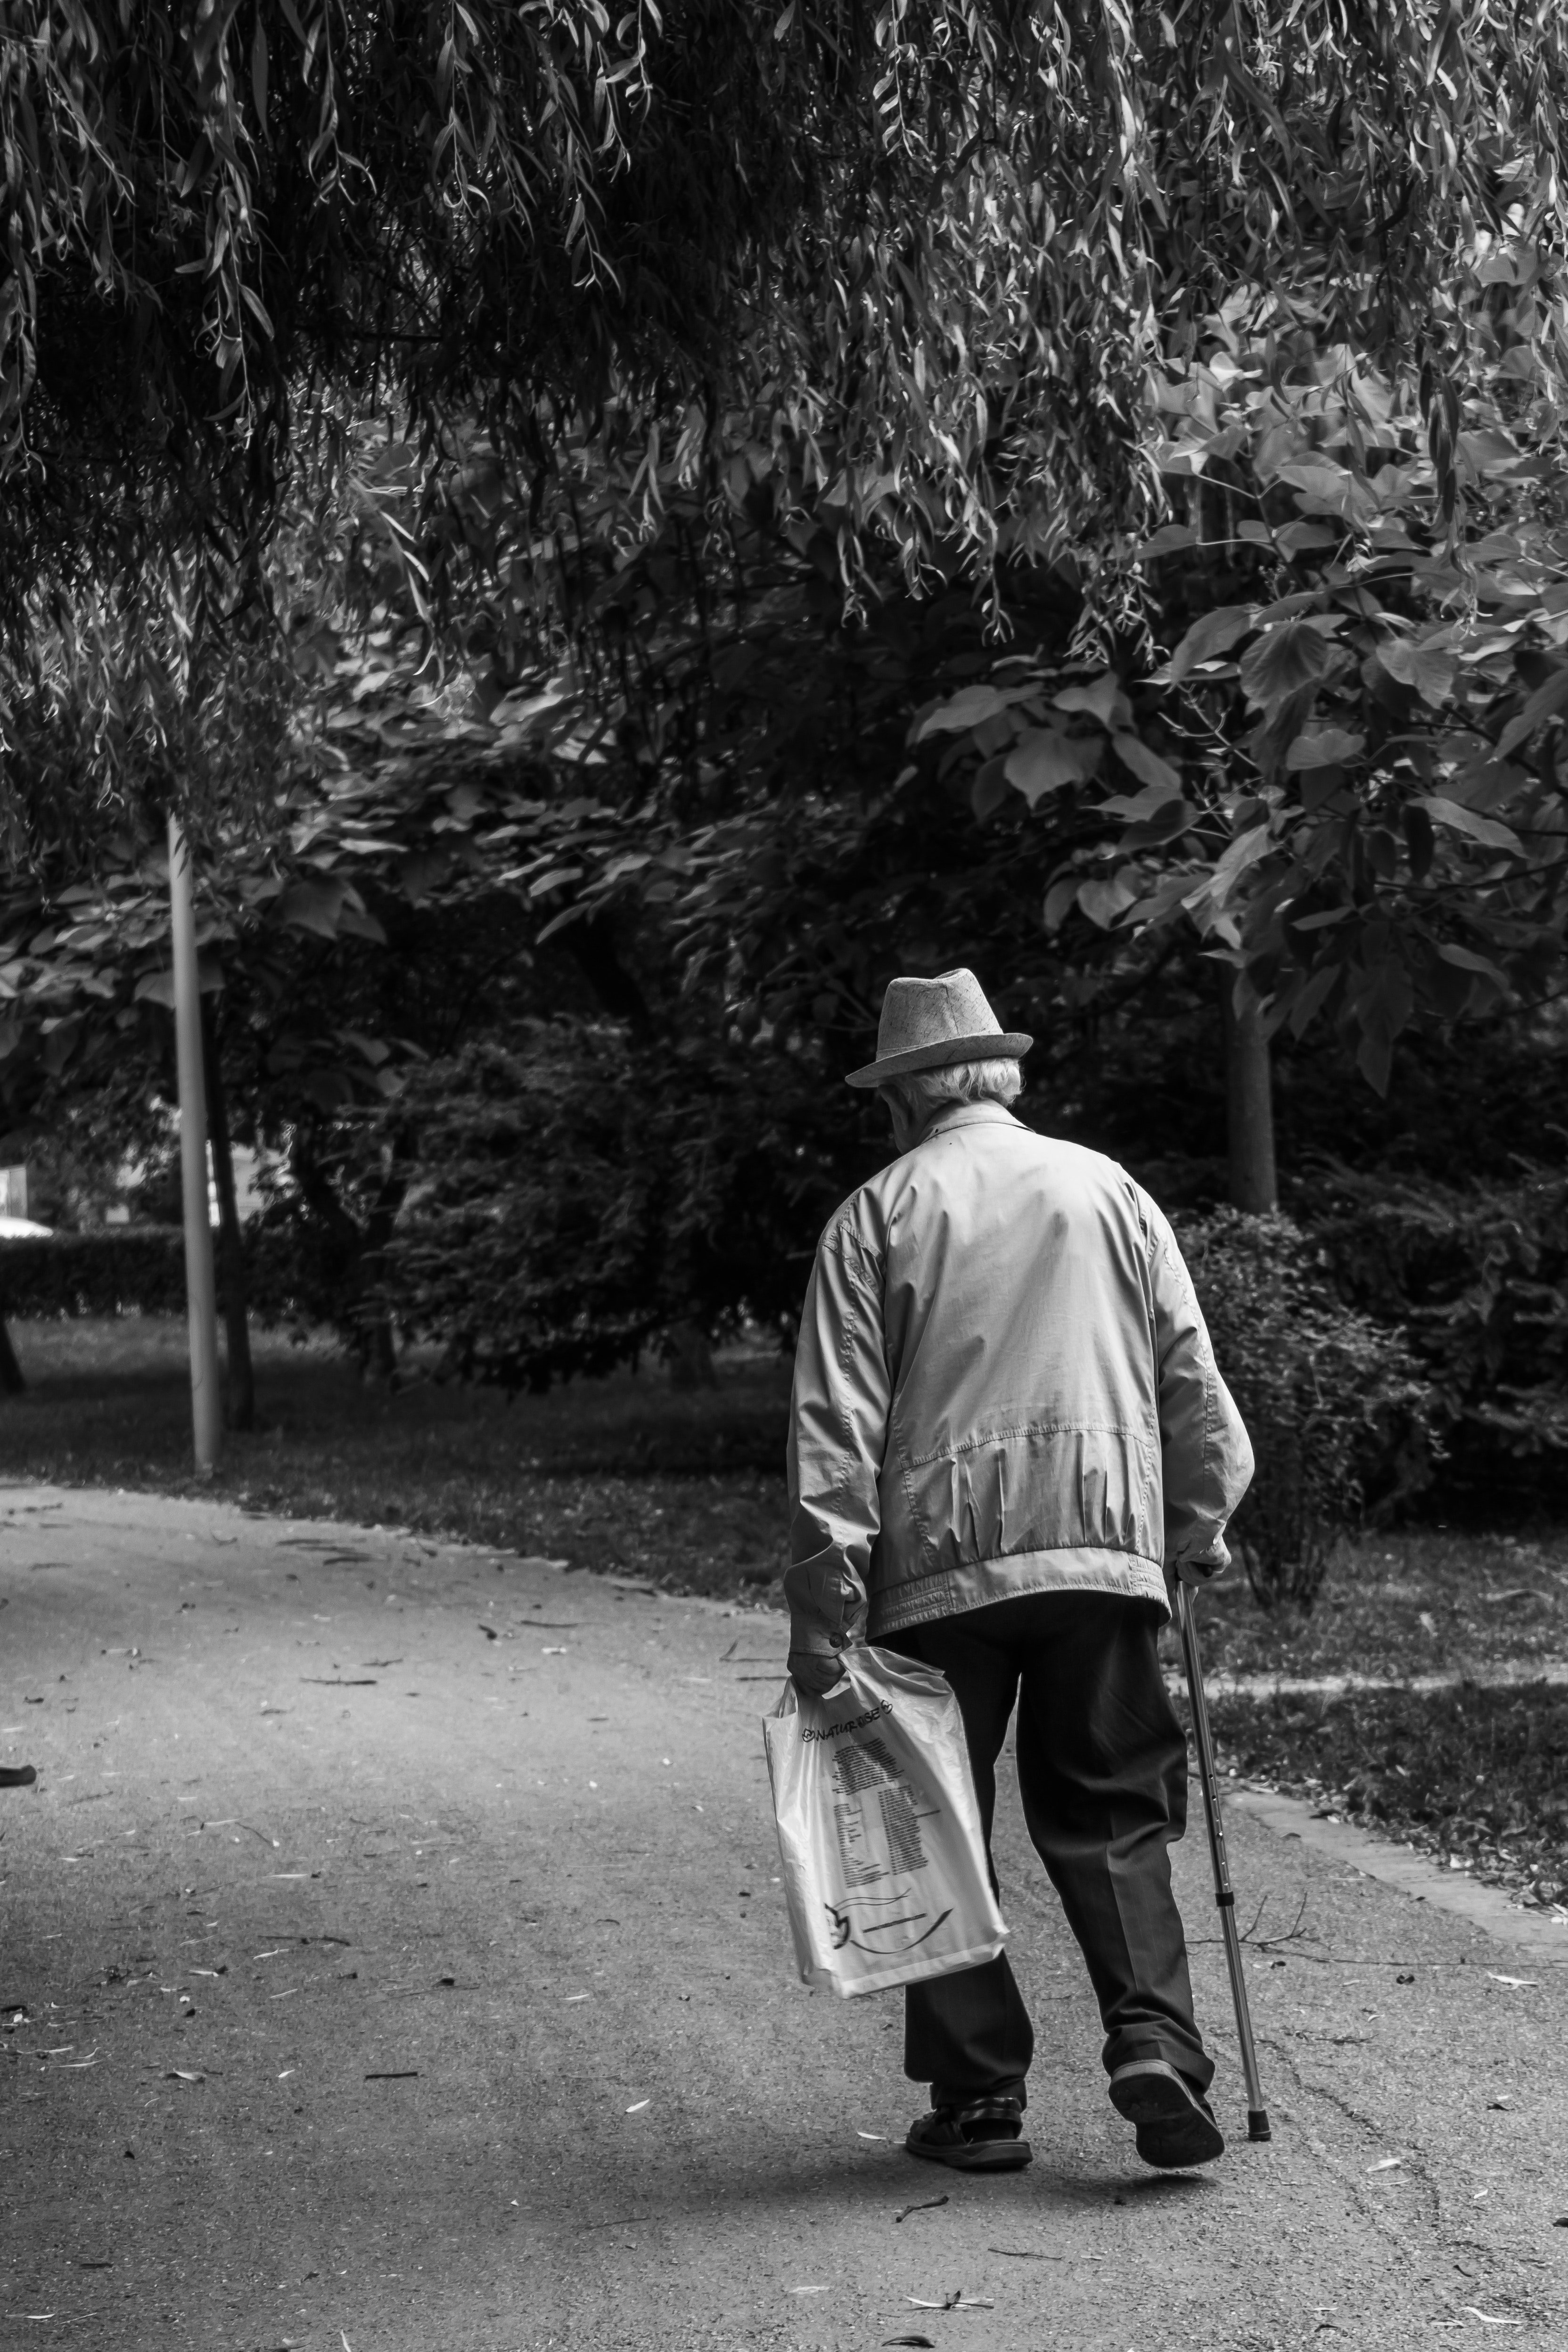 Patrick was a lonely old man who lived most of his life alone. | Source: Pexels